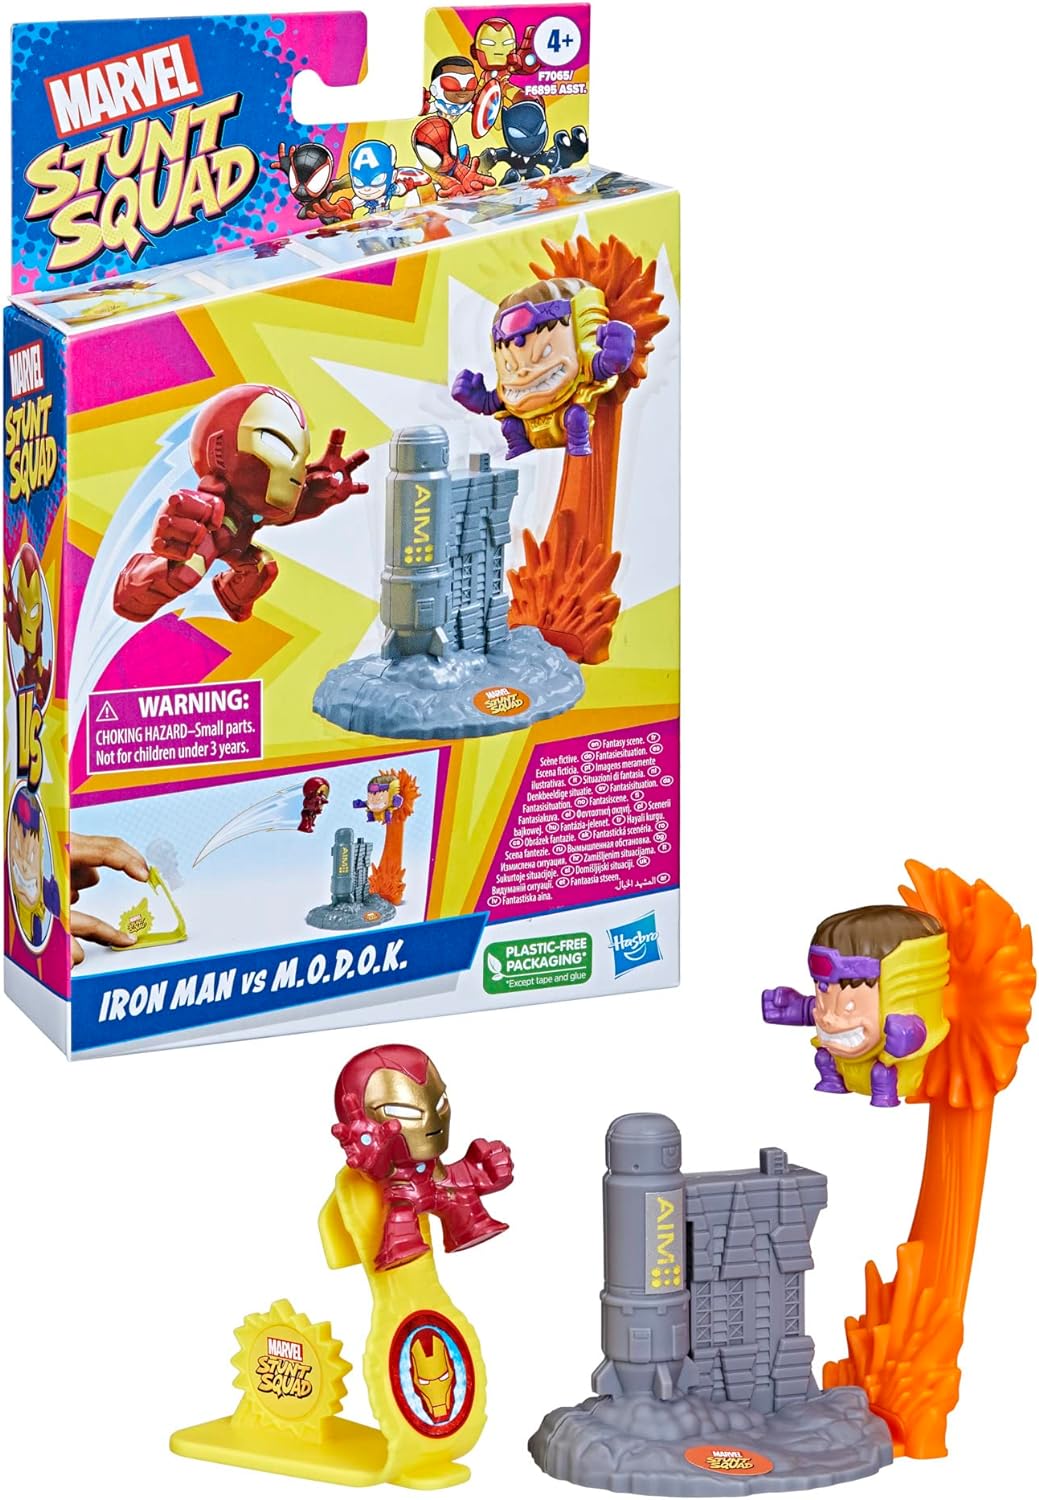 Marvel Stunt Squad Iron Man vs. M.O.D.O.K. Playset, 1.5-Inch Super Hero Action Figures, Toys for Kids Ages 4 and Up